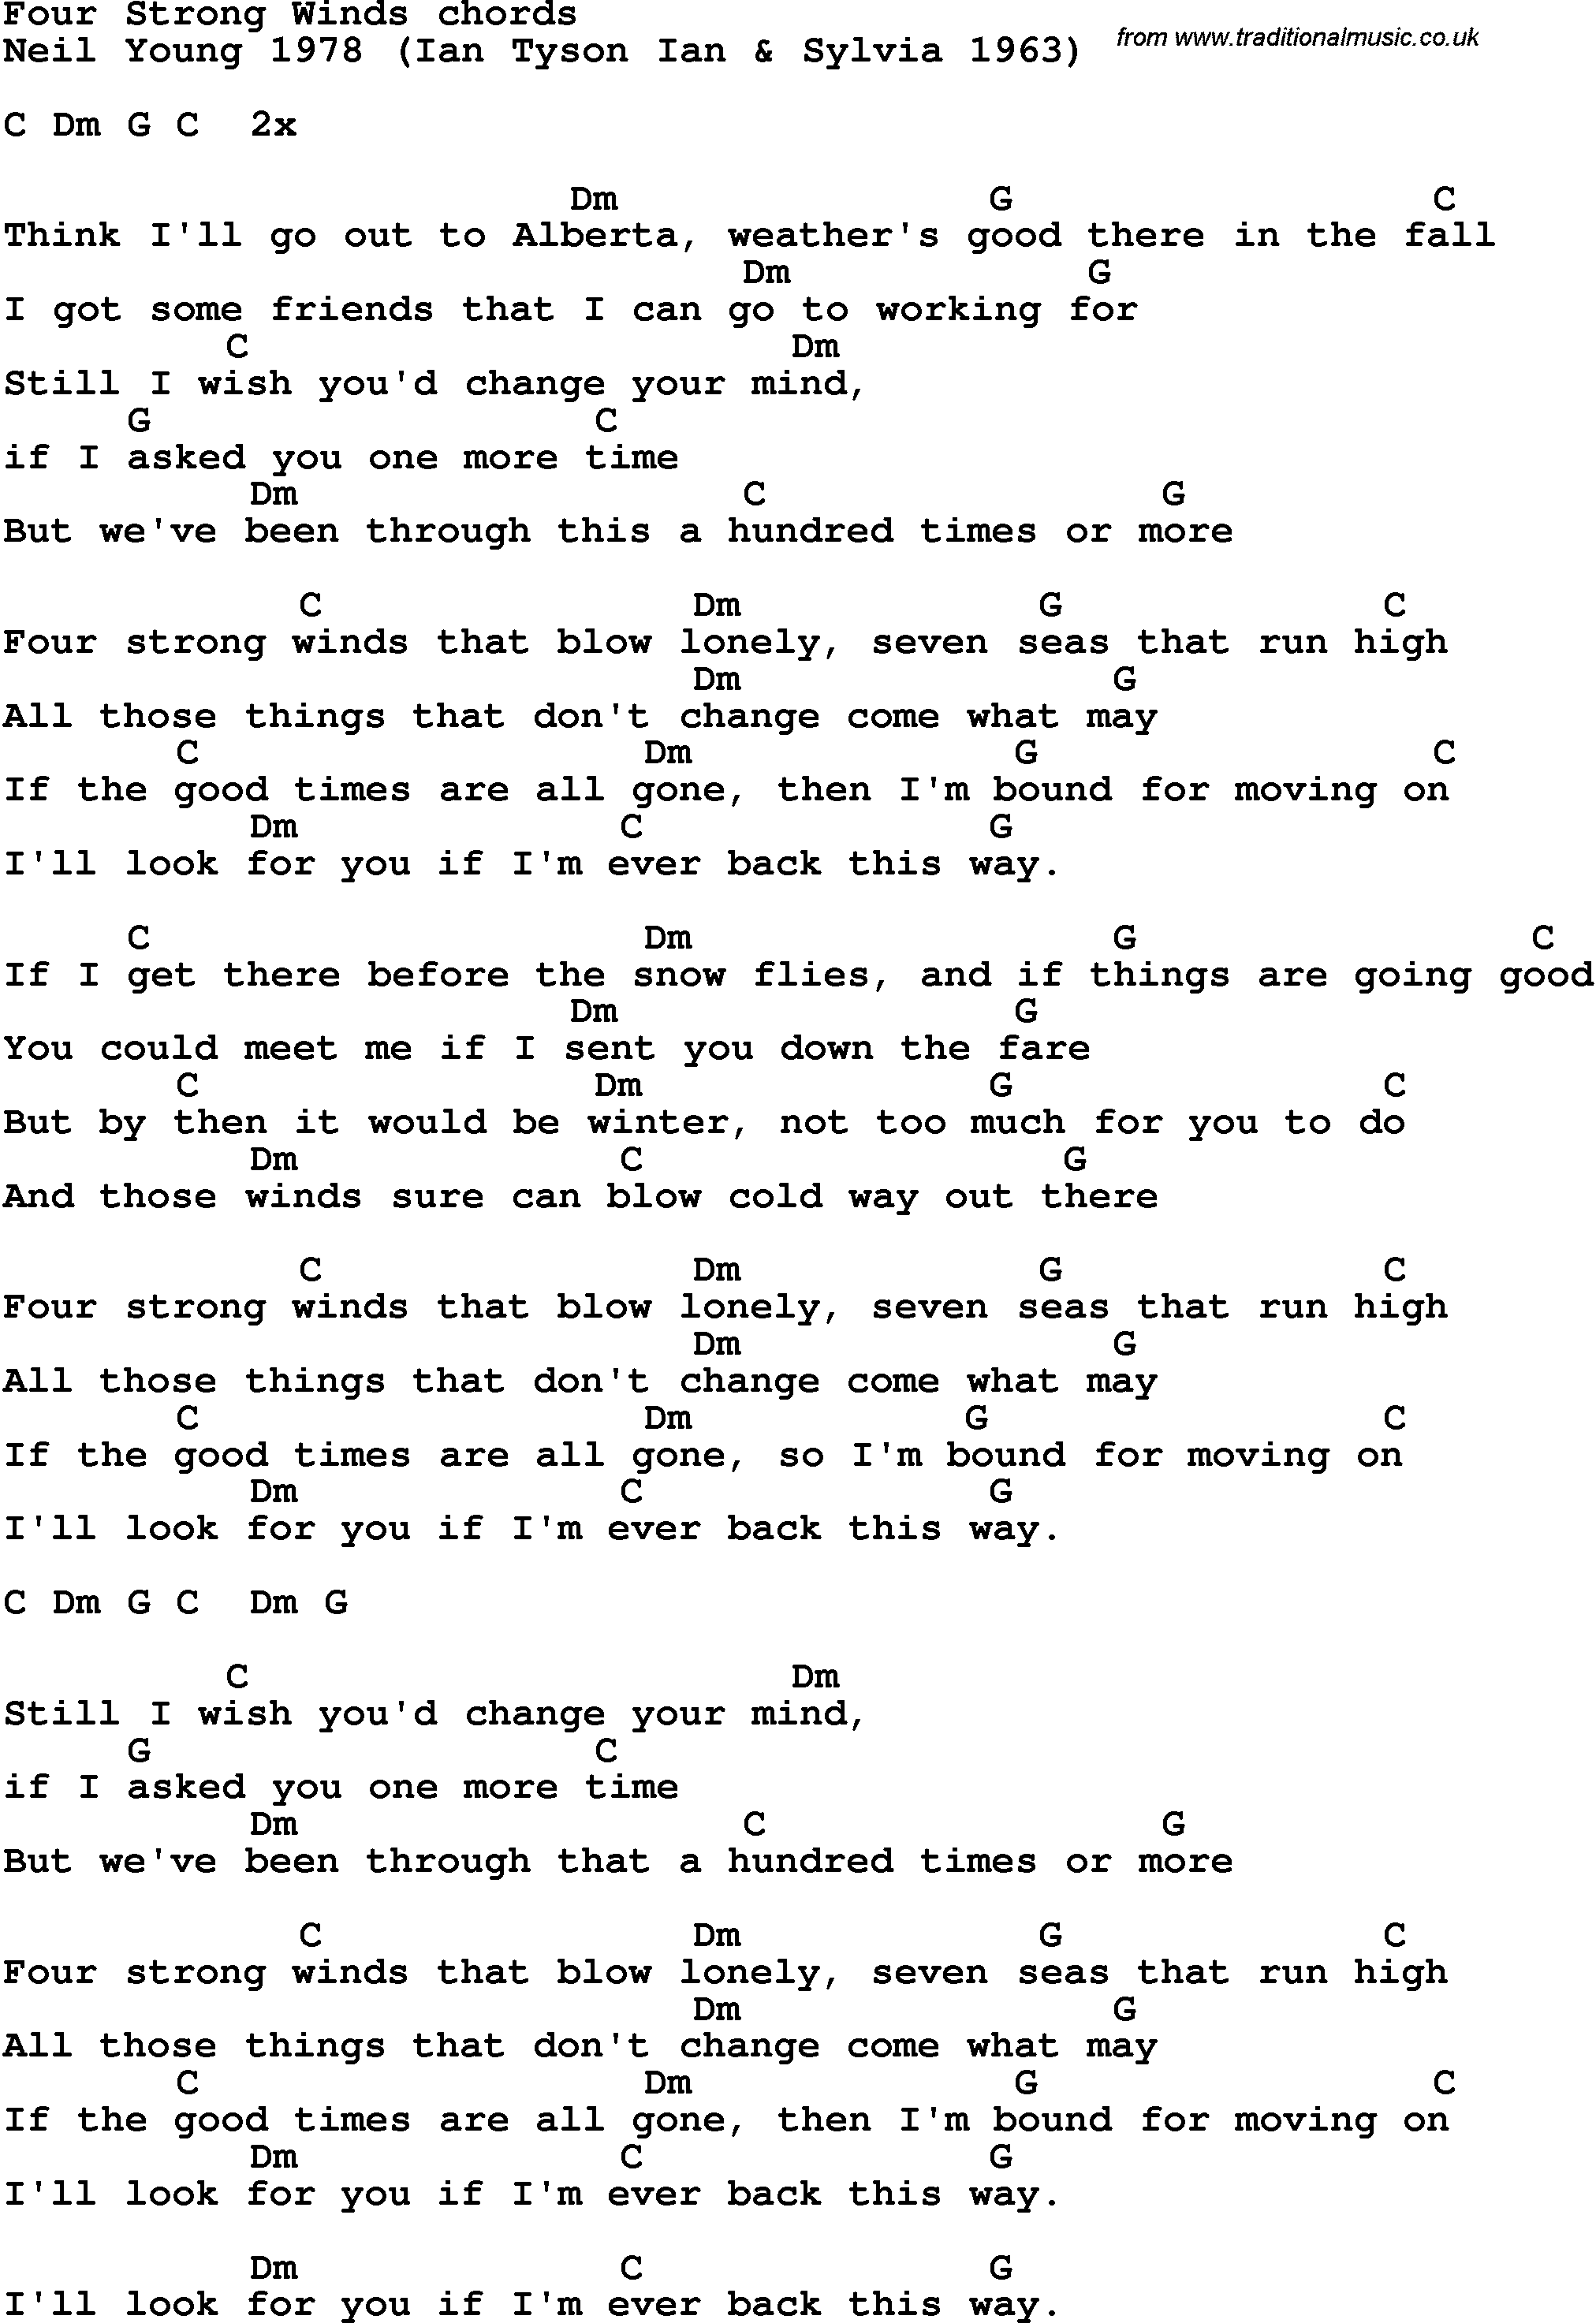 Song Lyrics with guitar chords for Four Strong Winds